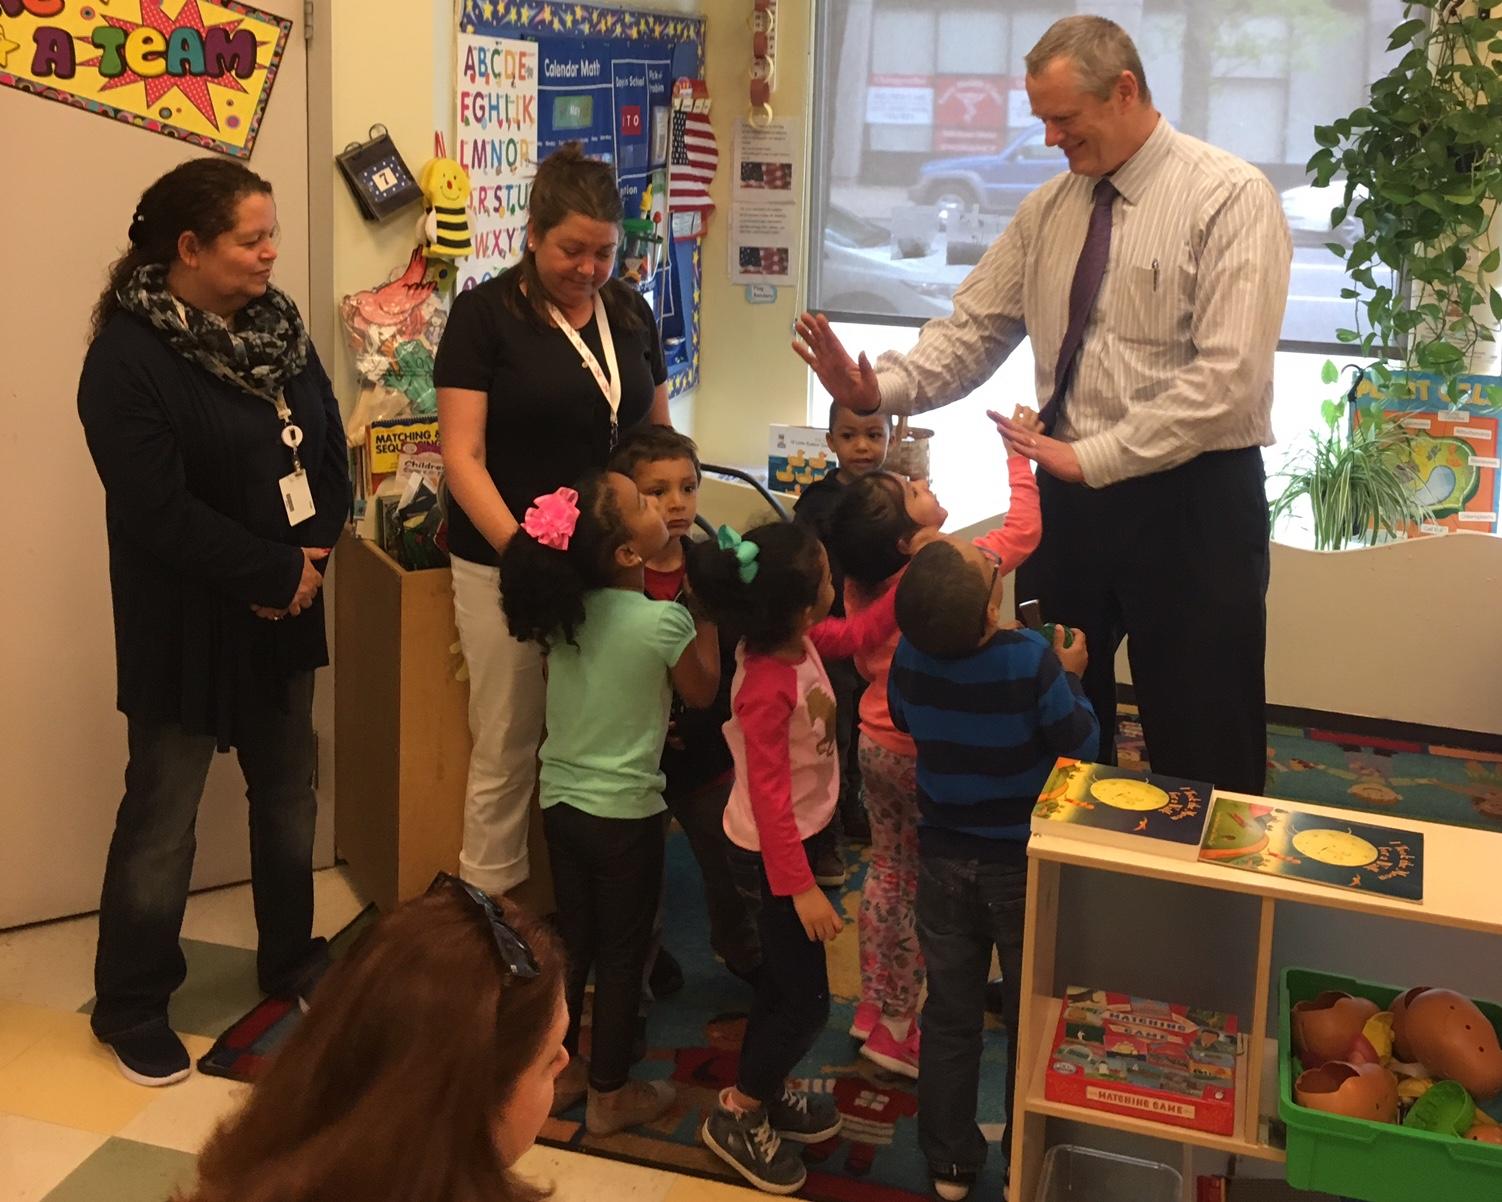 Photo of Governor Baker greeting children in a preschool classroom.